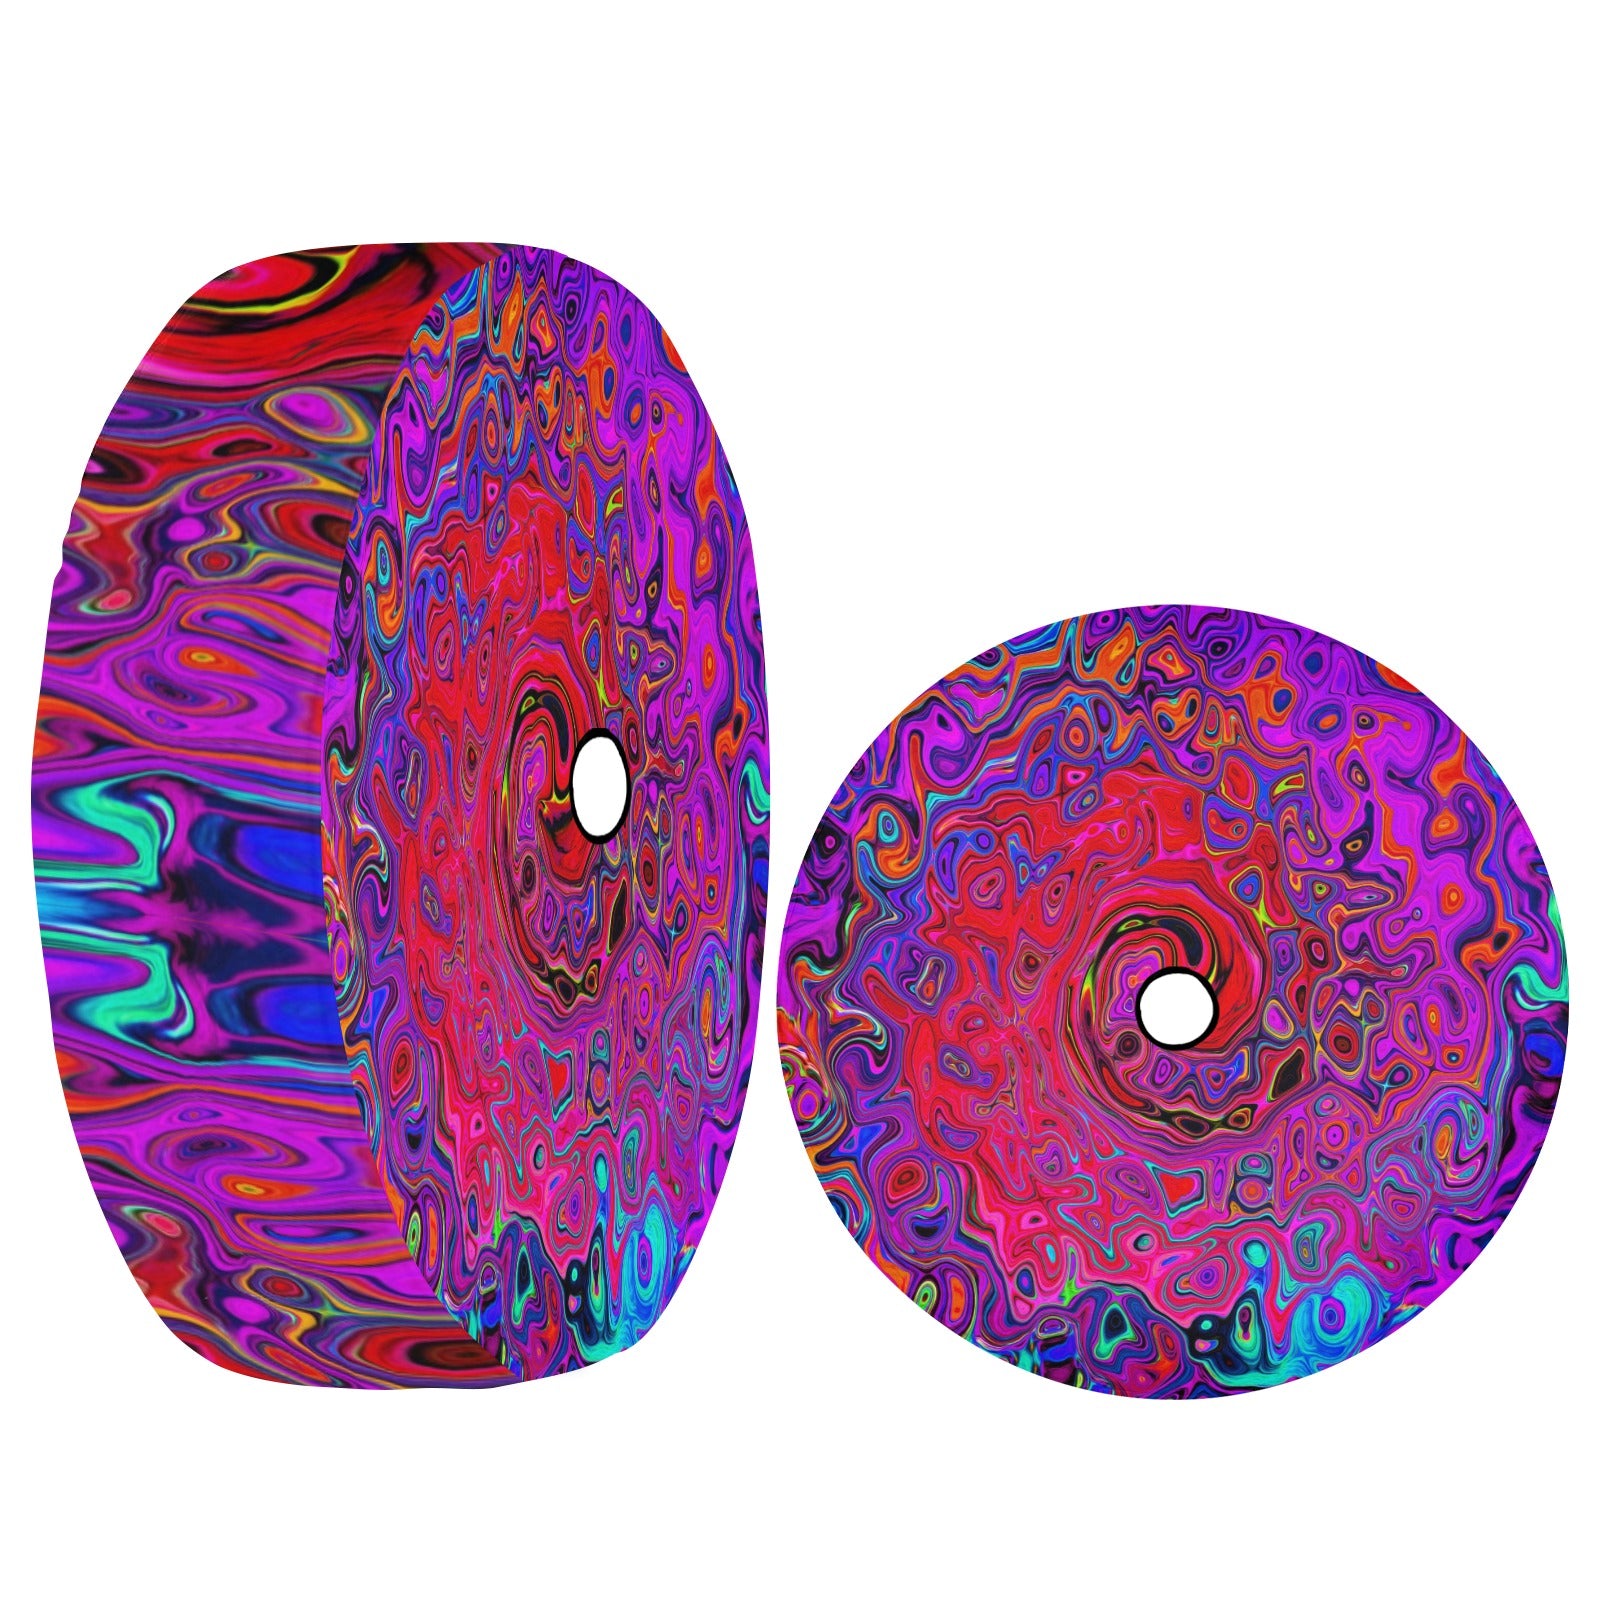 Spare Tire Cover with Backup Camera Hole - Trippy Red and Purple Abstract Retro Liquid Swirl - Medium